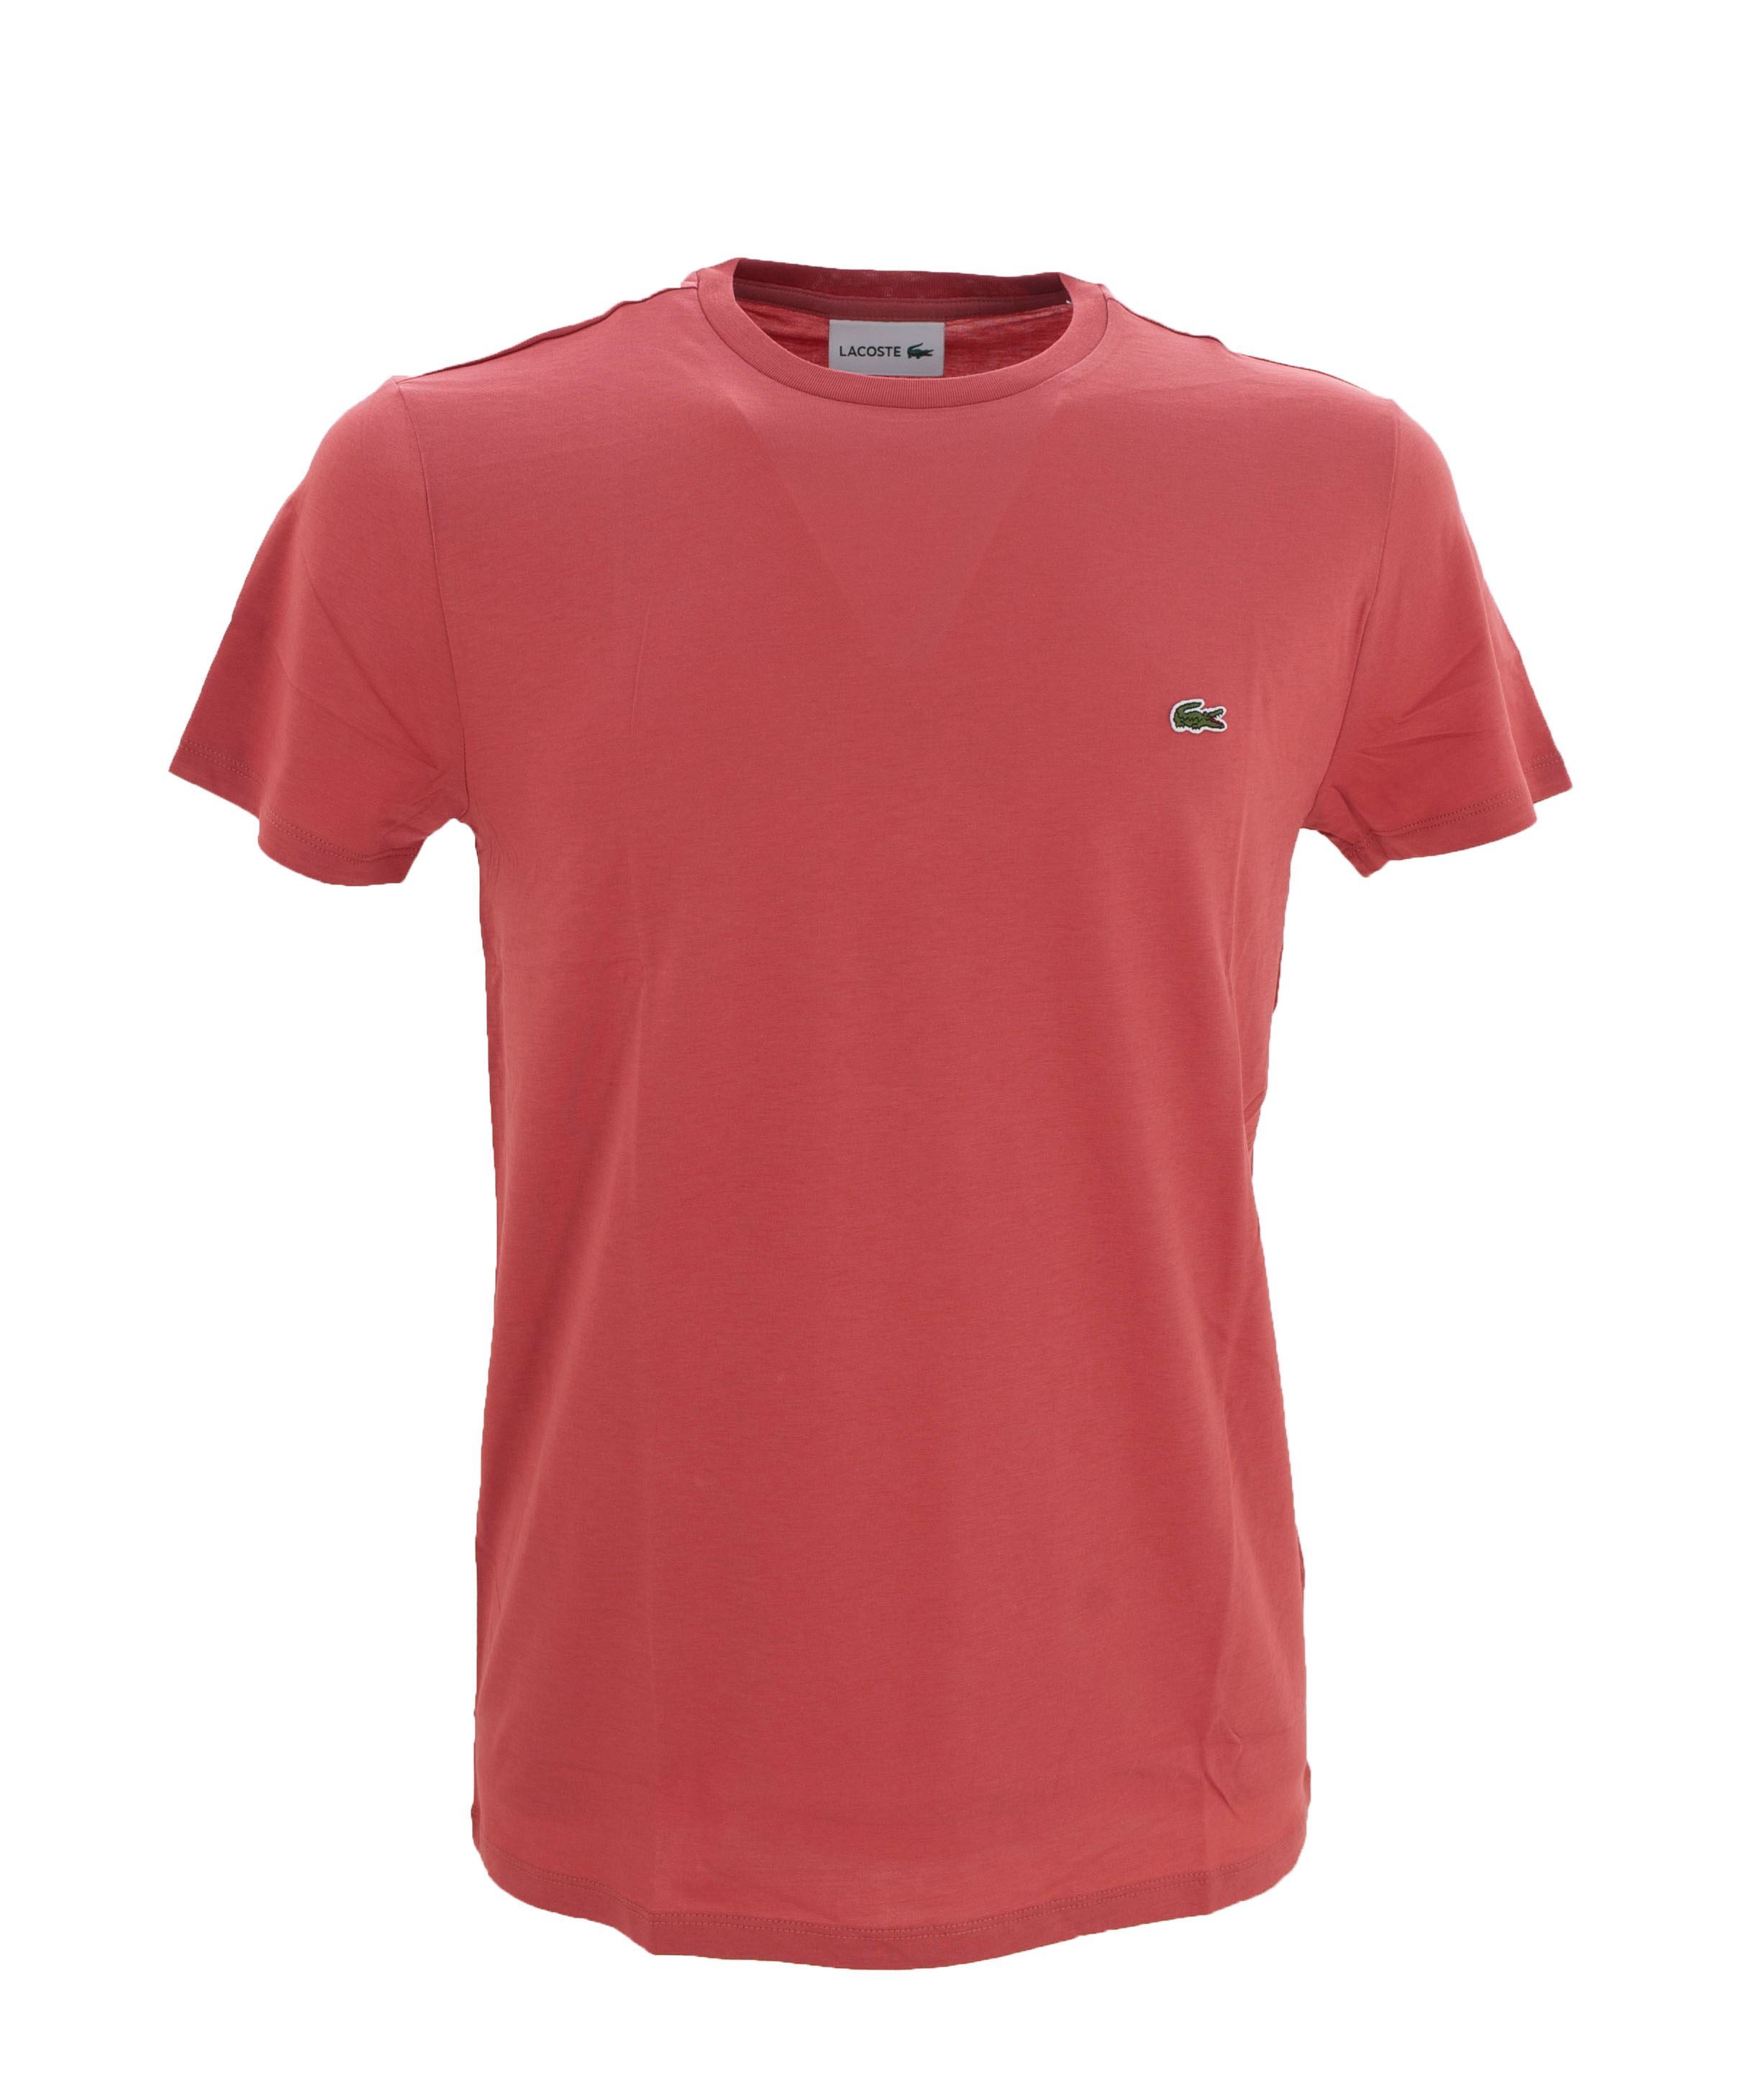 Picture of Coral red cotton t-shirt TH6709